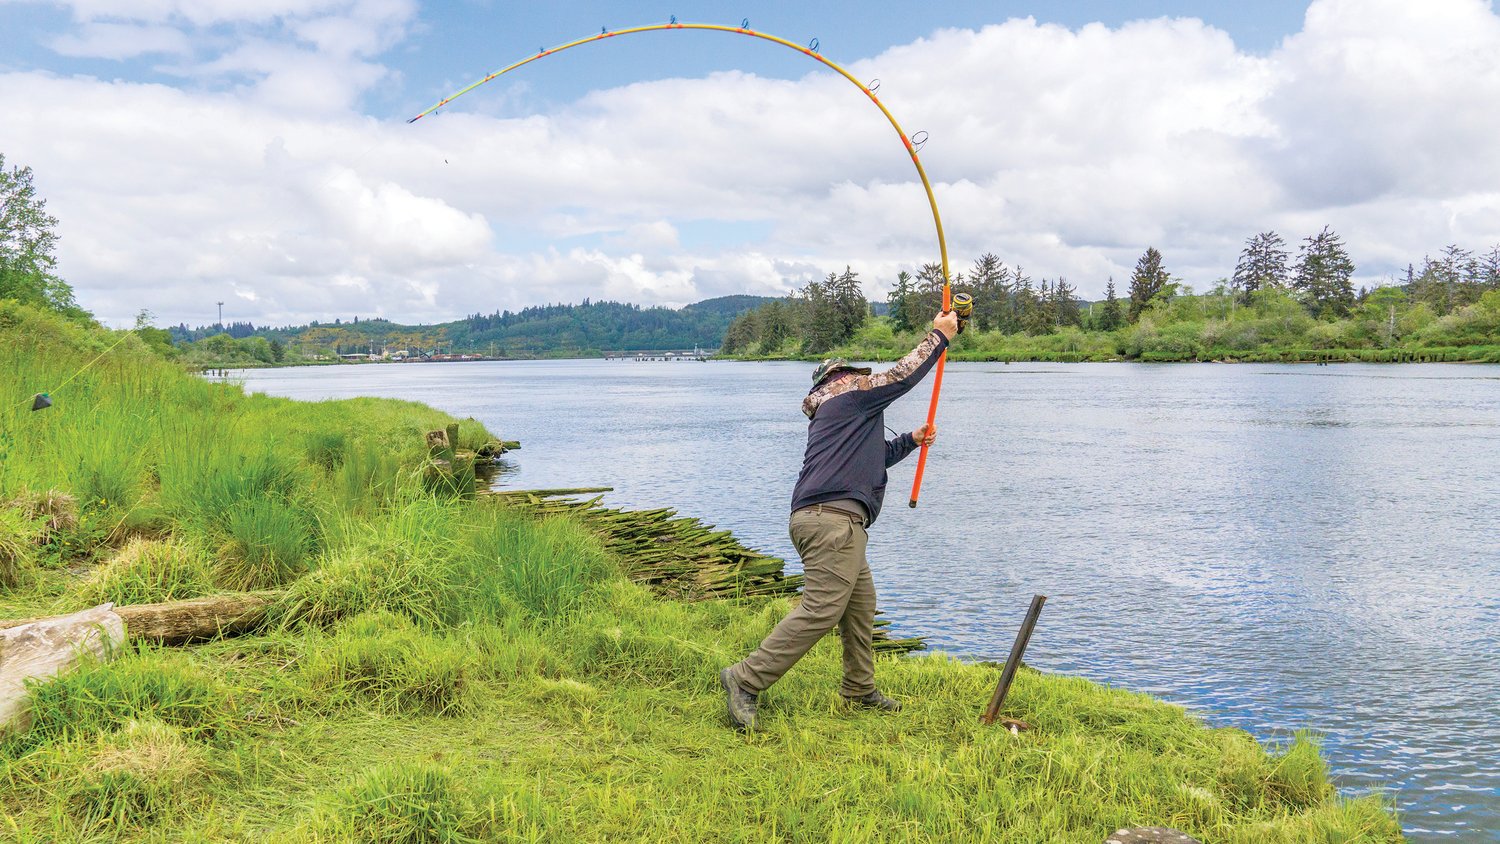 Rich Eaton casts out into the Chehalis River with his new custom Meat Hunter pole equipped with a 16 ounce weight while fishing for white sturgeon in Cosmopolis.